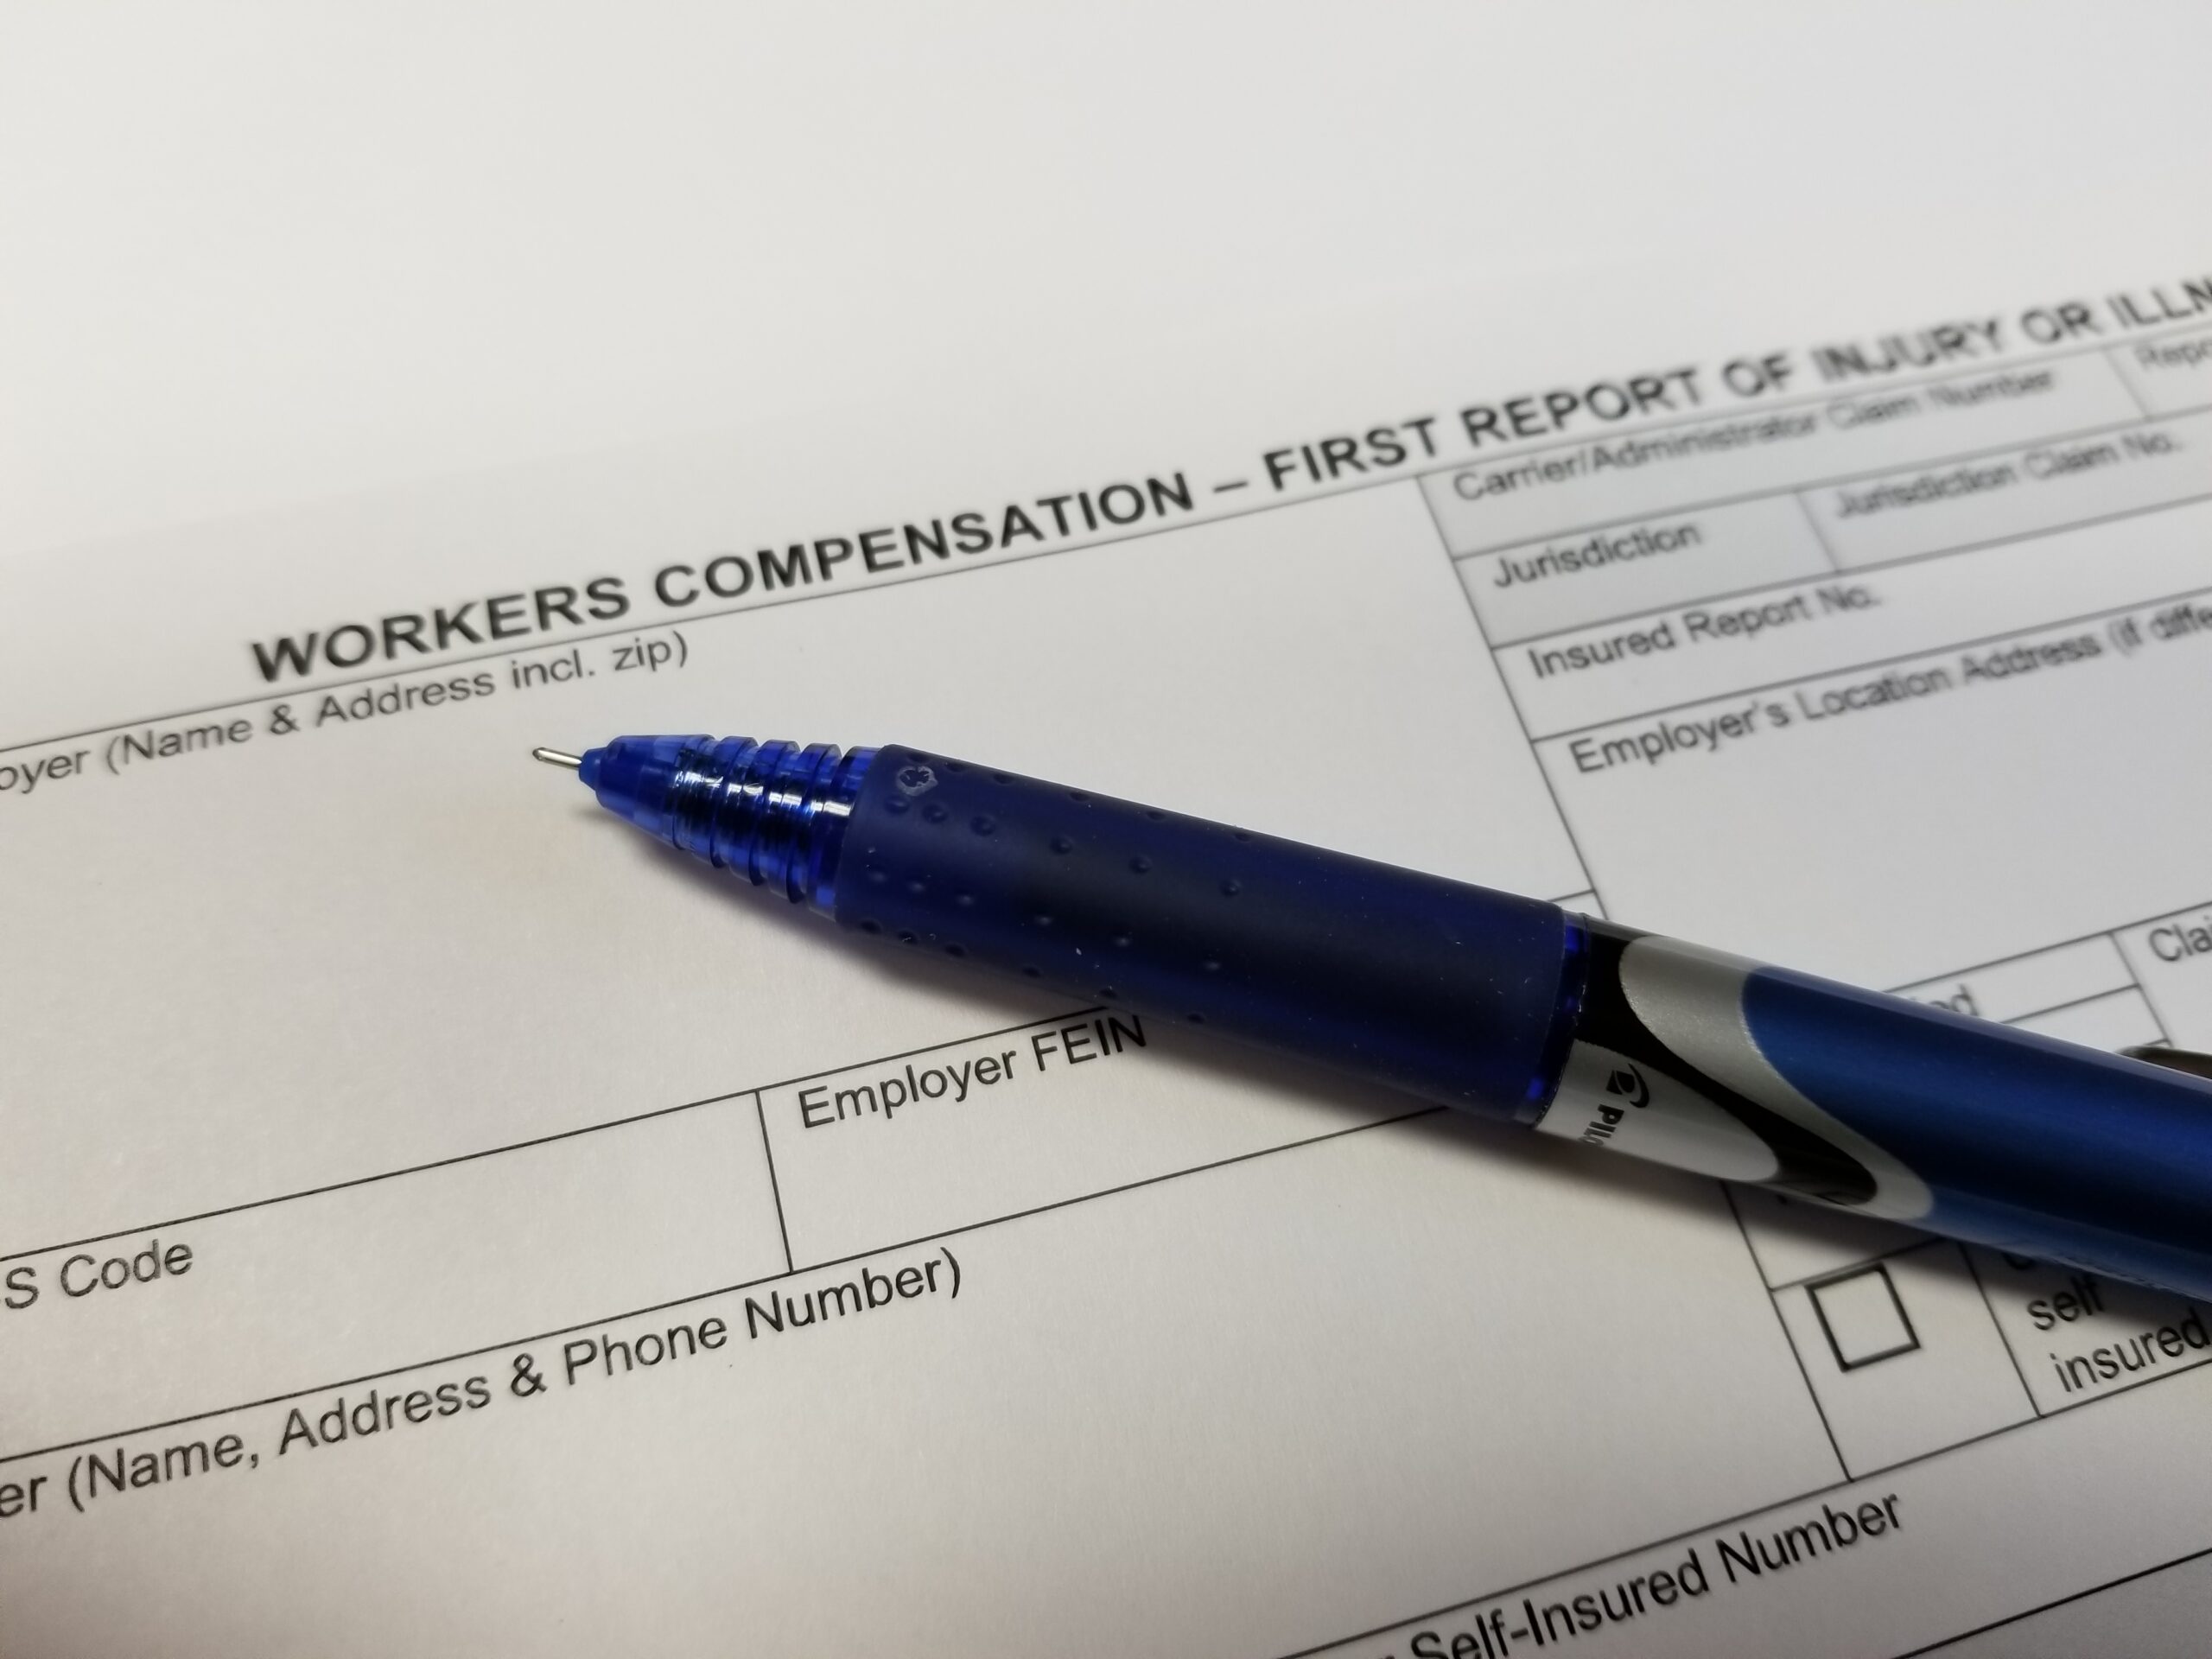 Idaho Workers' Compensation First Report of Injury